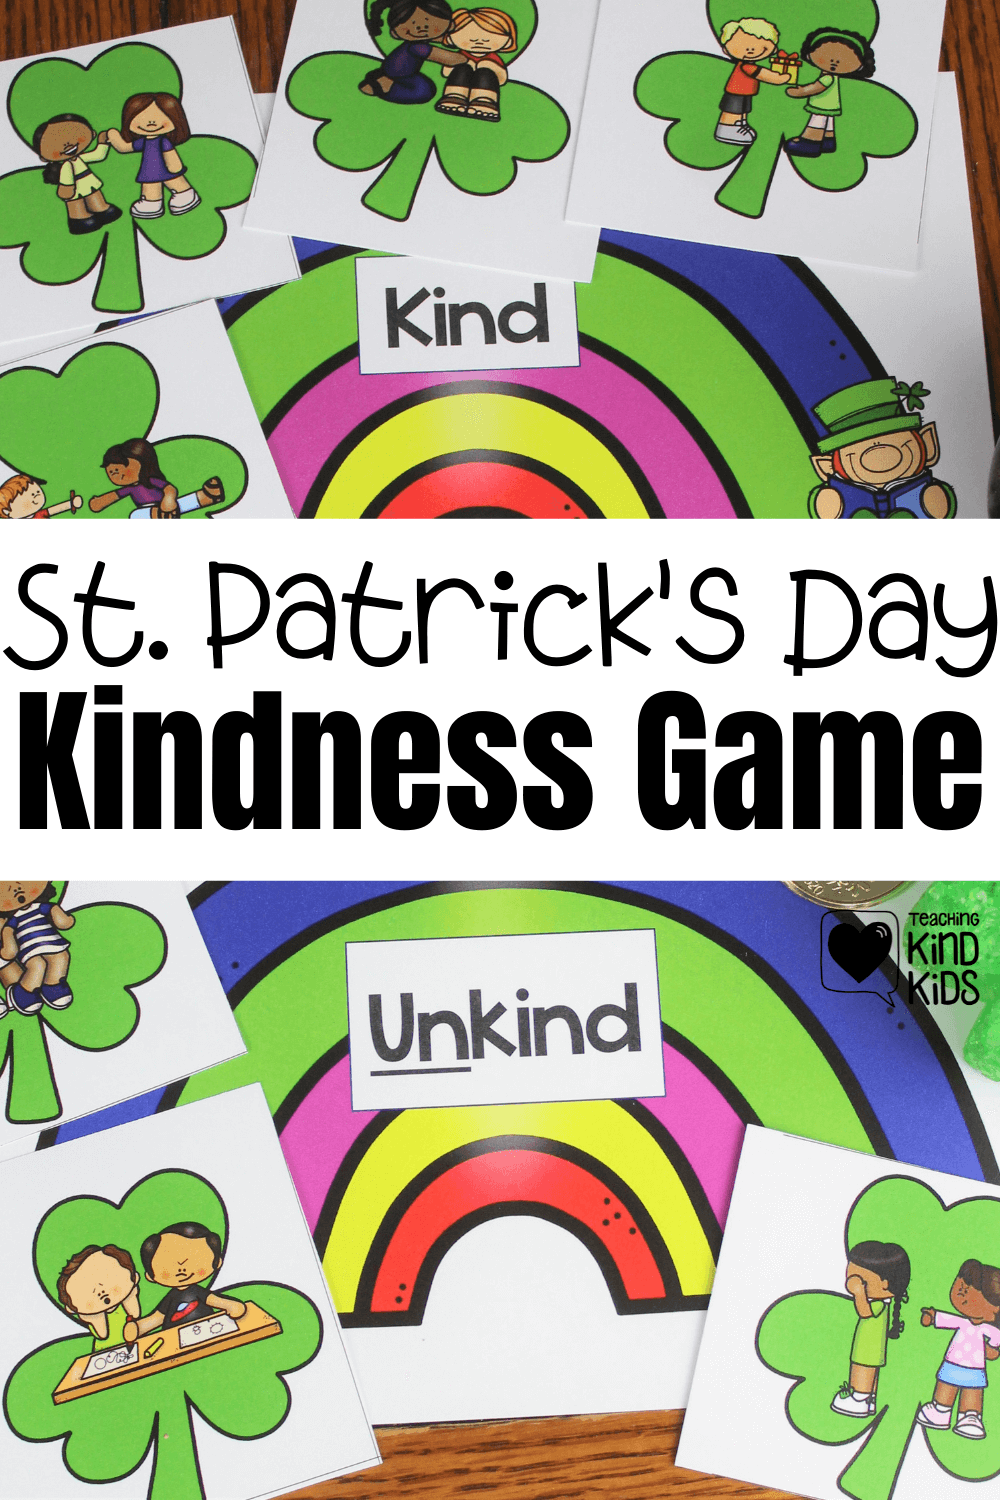 Use this shamrock kindness game perfect for centers to teach sel and character education during St. Patrick's Day and March